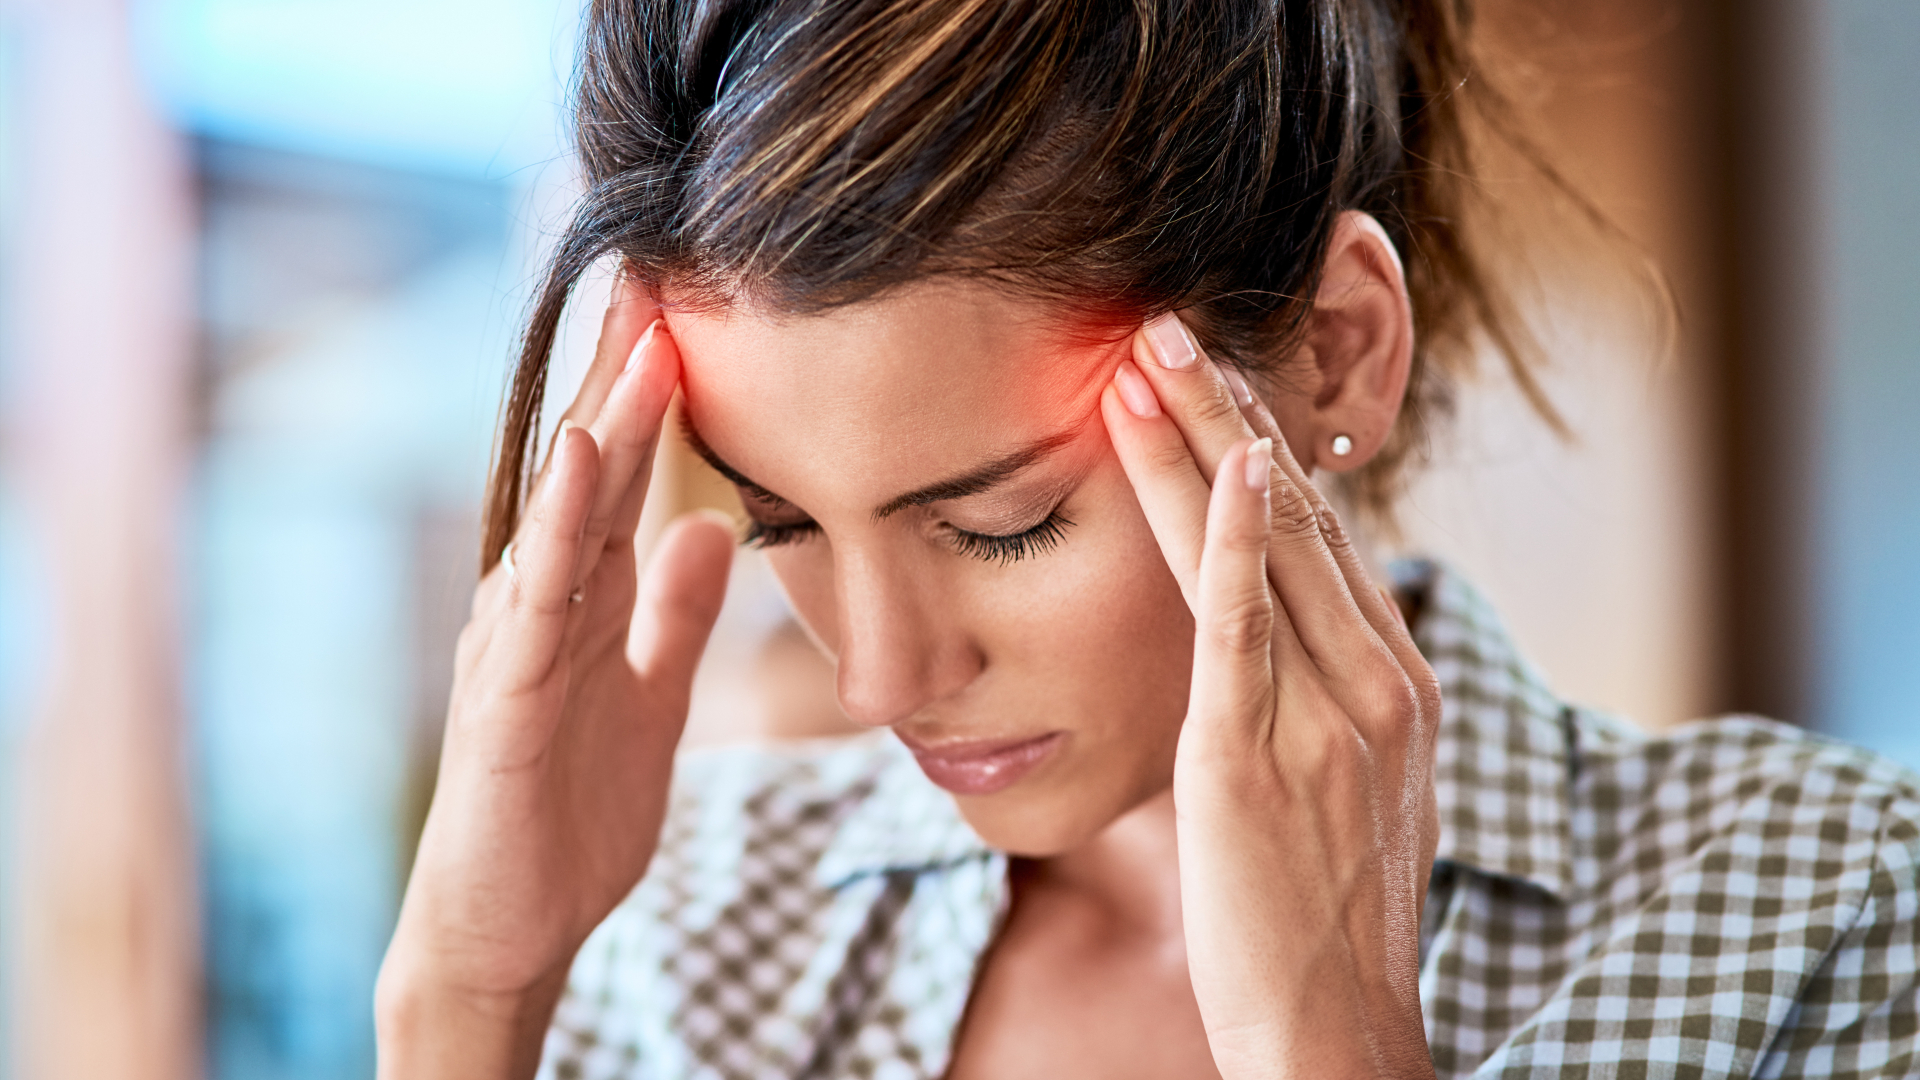 Woman experiencing migraine holding her head in agony